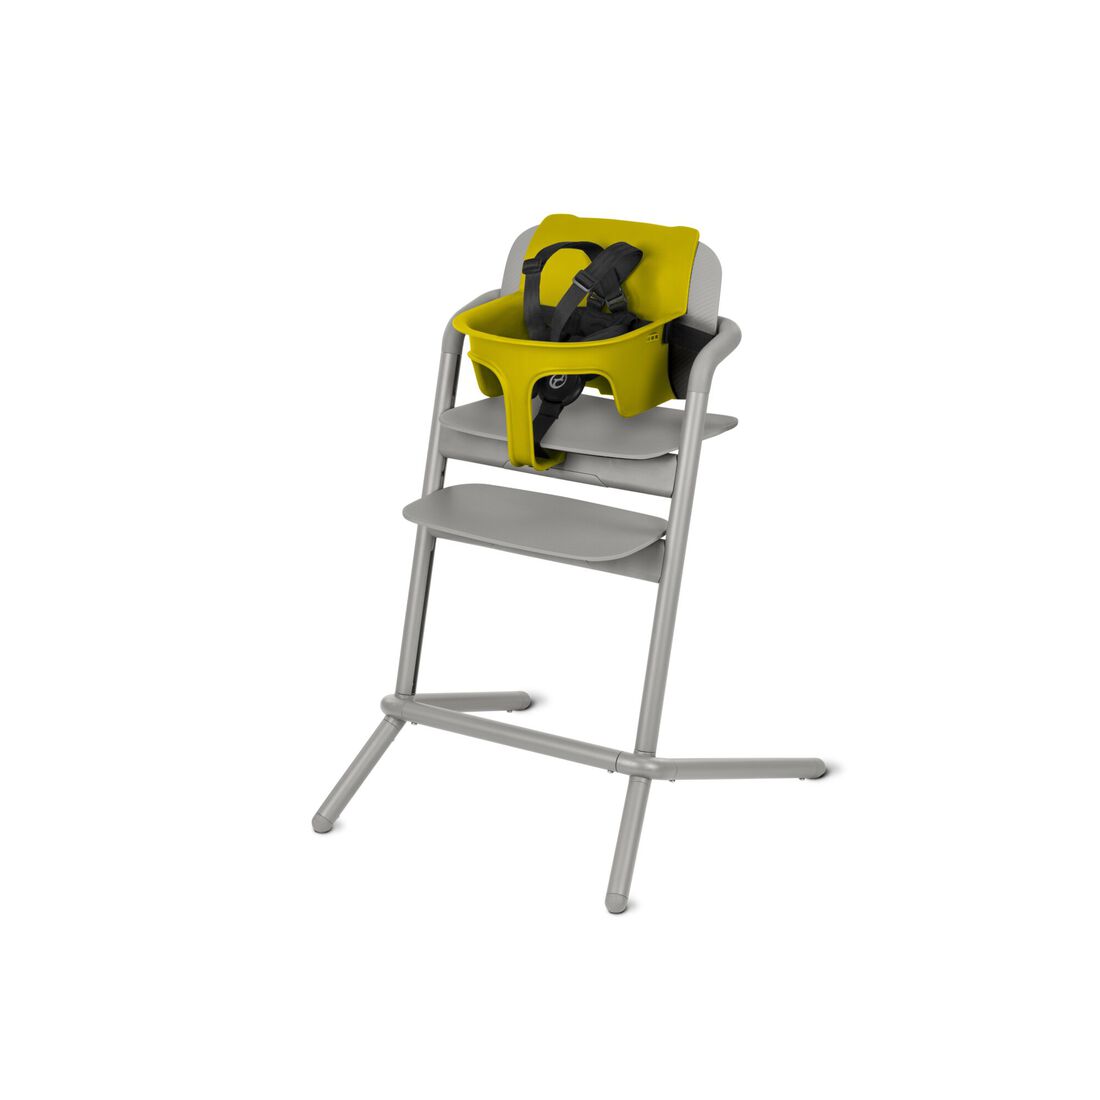 CYBEX Lemo Baby Set 2 - Canary Yellow in Canary Yellow large número de imagen 1